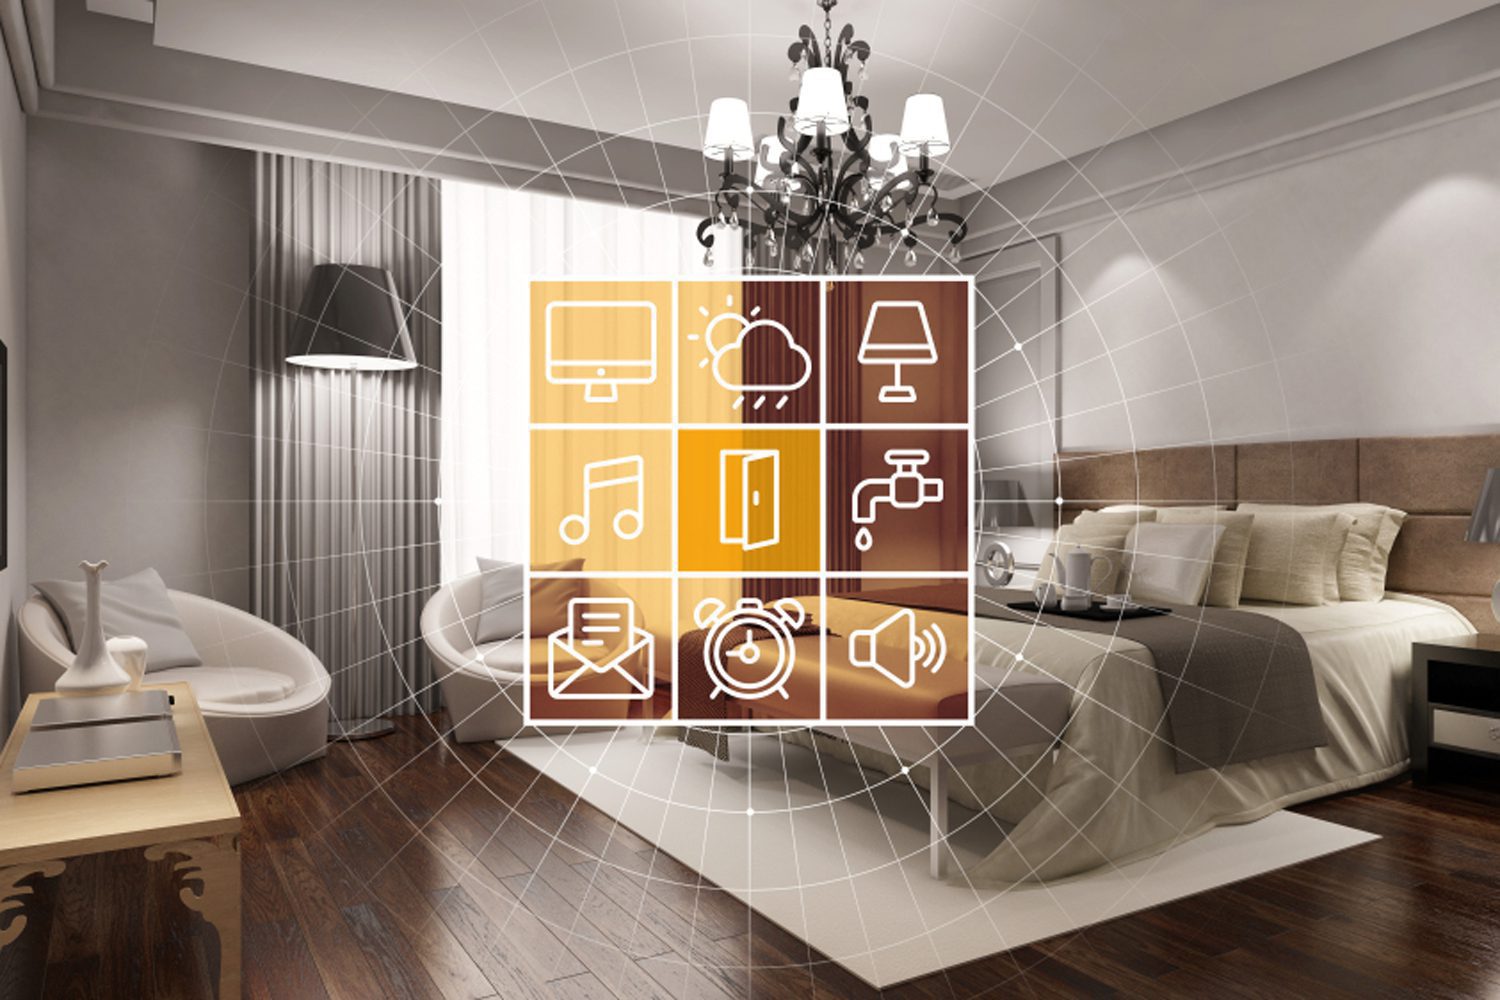 Latest Technologies in the Hospitality Industry